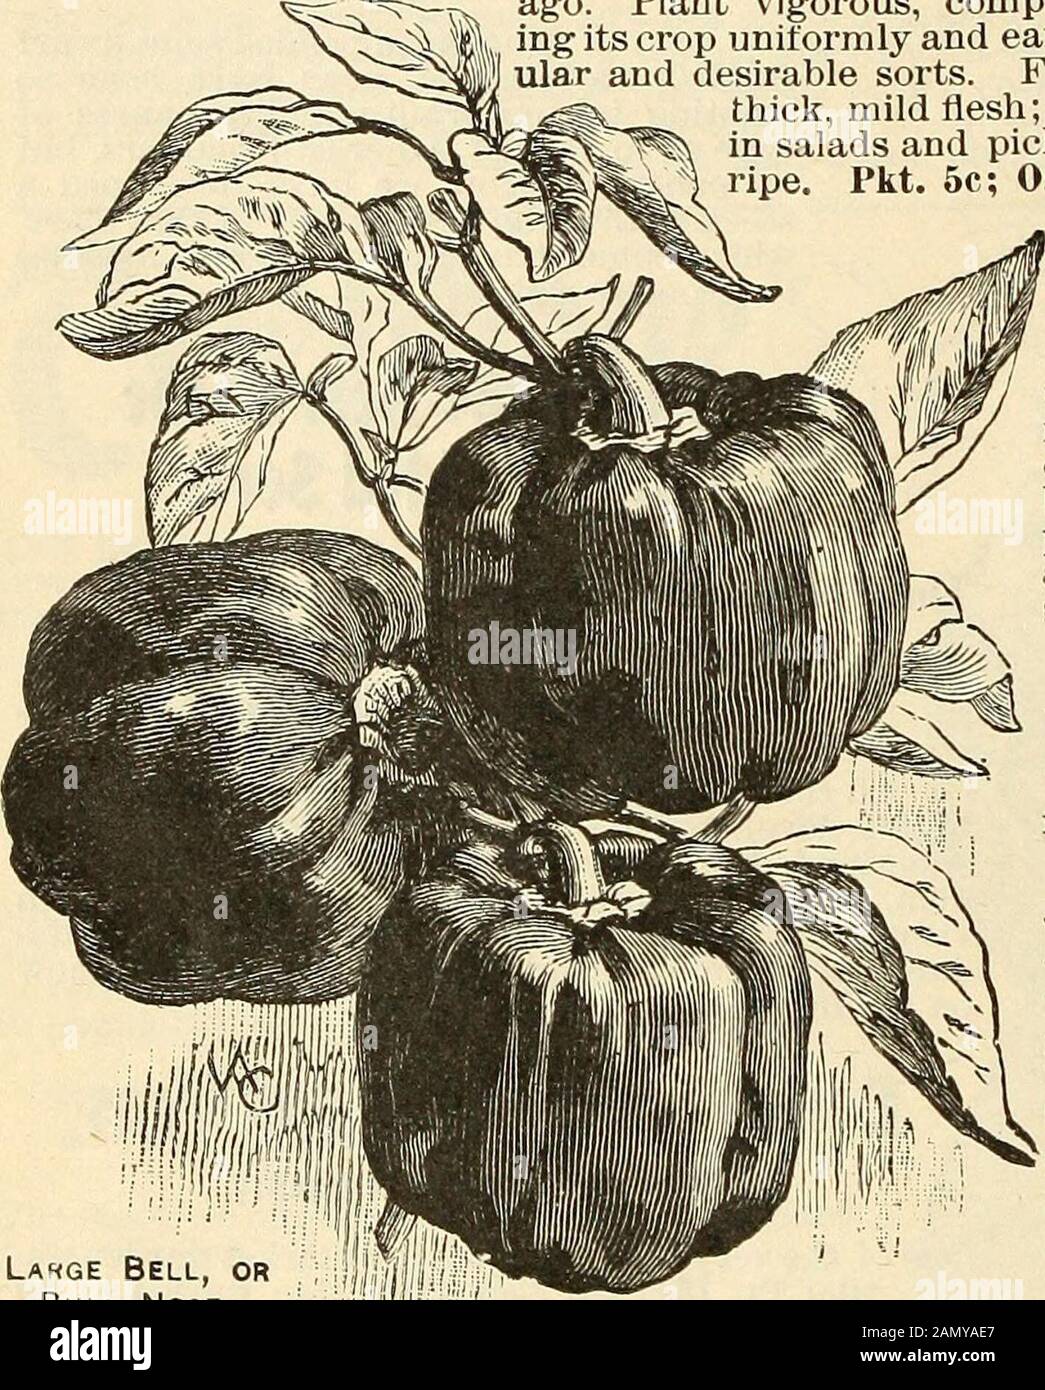 Seed annual, 1899 . 50V^llOID C^hili Similar in form to the Red Chili, but a little shorter and thicker,X^-iivw jtfiu j^oj-e pungent, and of a very beautiful yellow color. Pkt. 10c; Oz. 35c; 2 Oz. 60c; ^ Lb. $1.00; Lb. $3.50 Vett Rd ^mi»nu& a rather late sort having a long, slim, pointed pod, andl-Vliy VKVt ^ayt^llll^ ^^j^g^ ripe, of a bright red color. Extremely strong andpungent. Pkt. 5c; Oz. 25c; 2 Oz. 40c fara^Rdl &lt;»rBuiin»$e mM^** JJ^ M^^f improvement oi •ipe, of a brightpungent. Pkt. 5c; Oz. 25c; 2 Oz. 40c; ^ Lb. 75c; Lb. $2.25 Our stock of this well known variety whichis sometimes Stock Photo